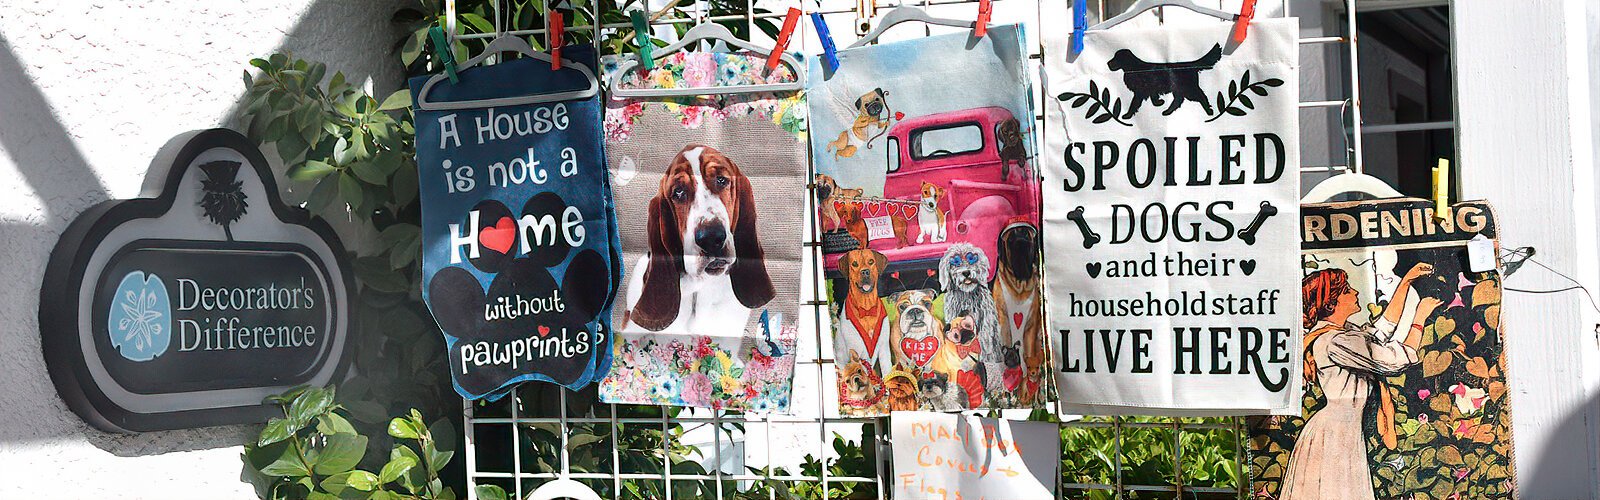 More dog-related items are for sale at the Decorator’s Difference home accessories shop.